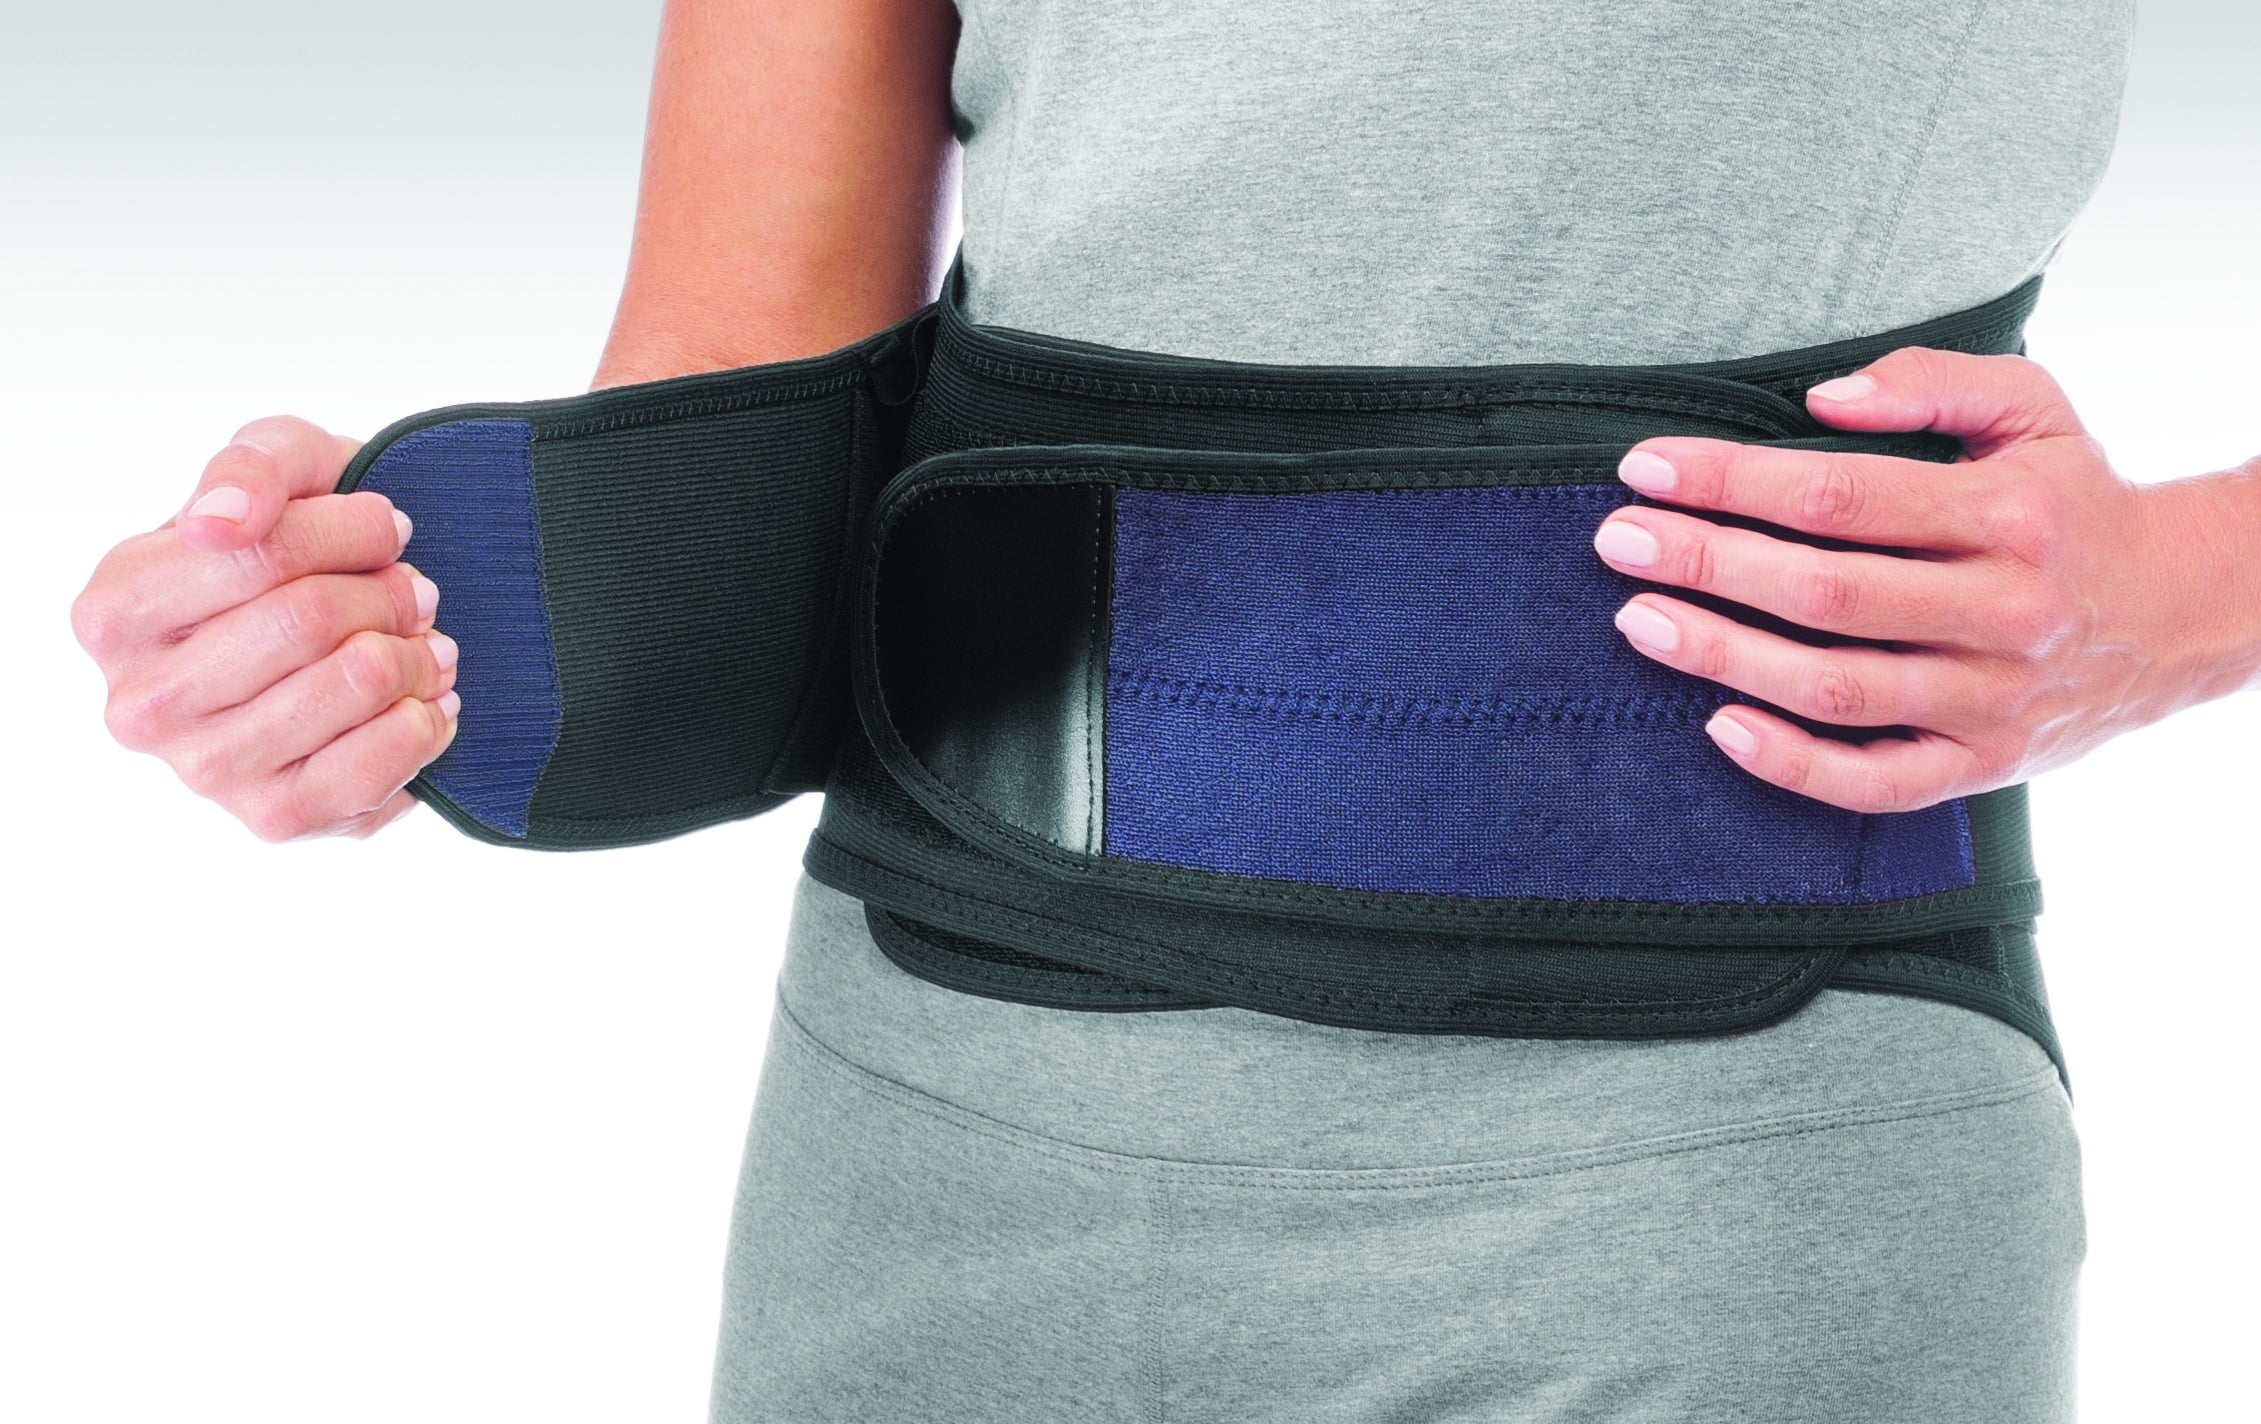 Adjustable Back Brace with Lumbar Pad, Back Support Braces, By Body Part, Open Catalog